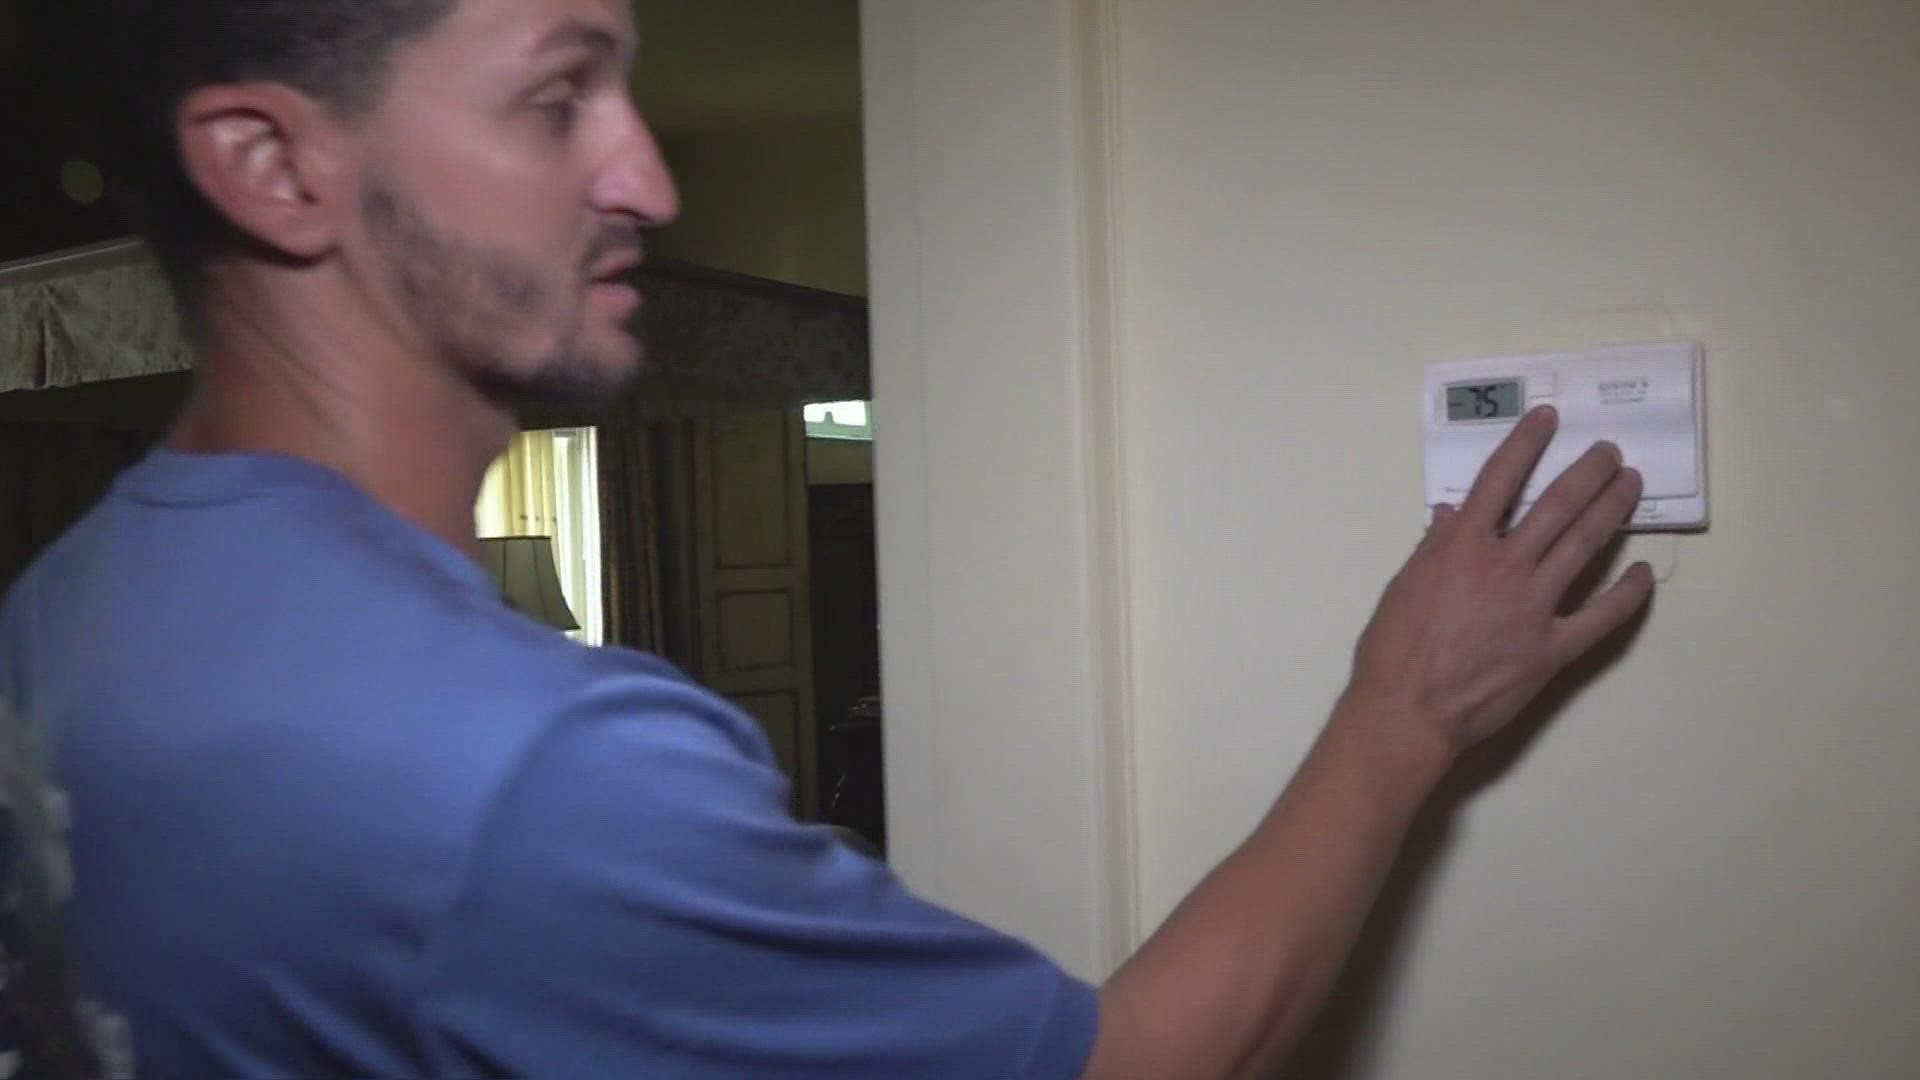 Erika Ferrando follows an AC technician to find out what you can do to keep your house cooler.